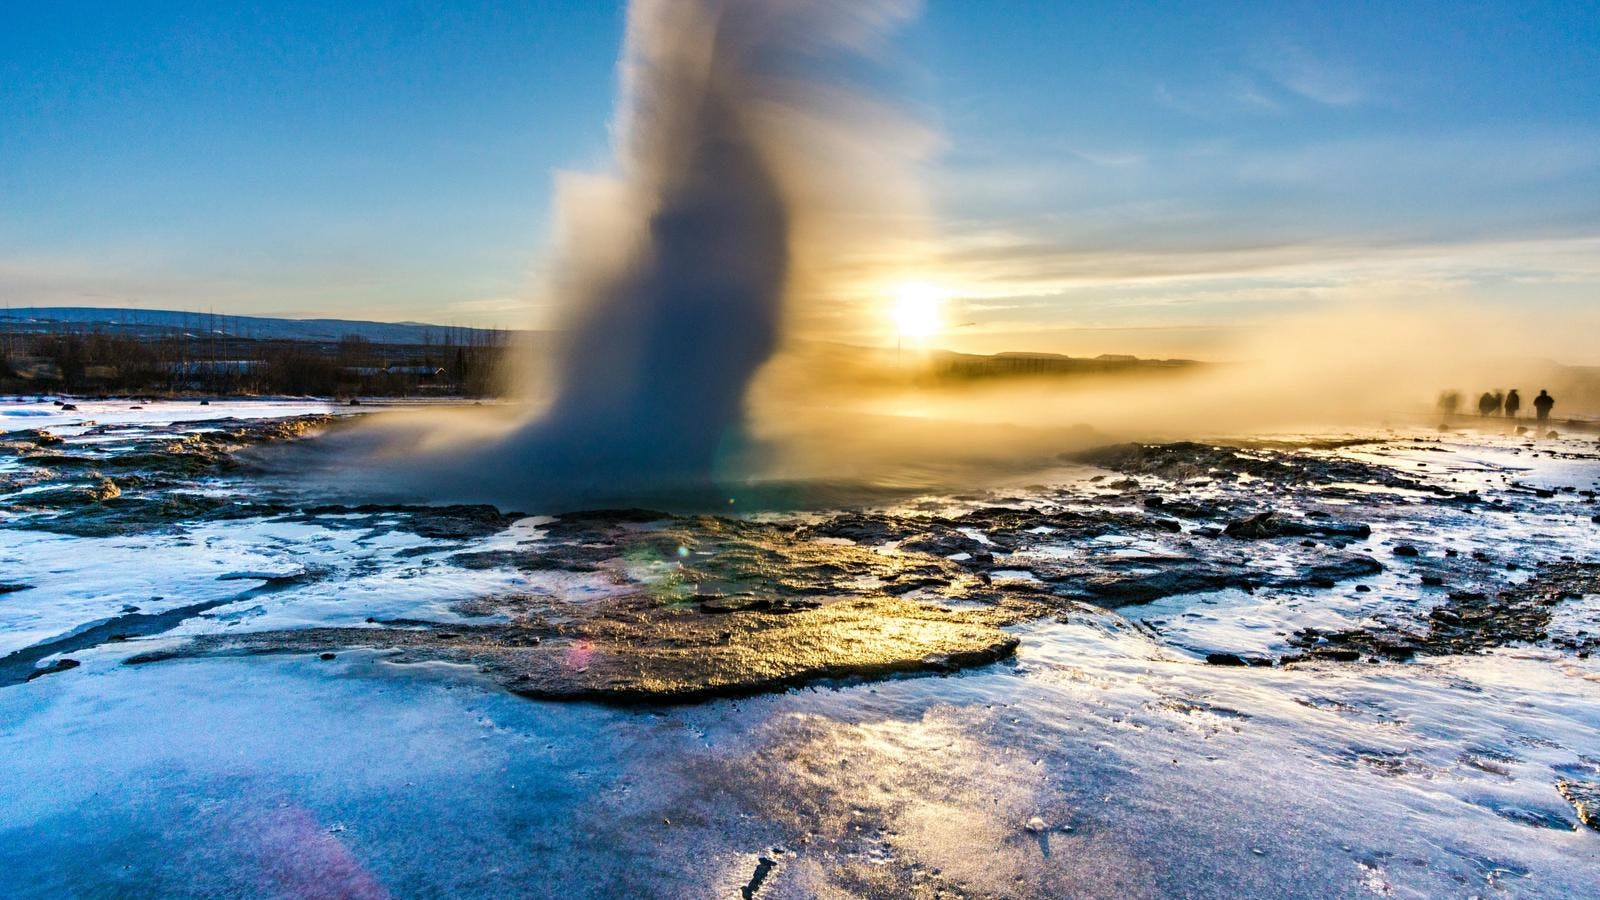 Geysir erupting on a winter day with the sun setting behind it. Tourists on a Golden Circle tour watch from a distance.